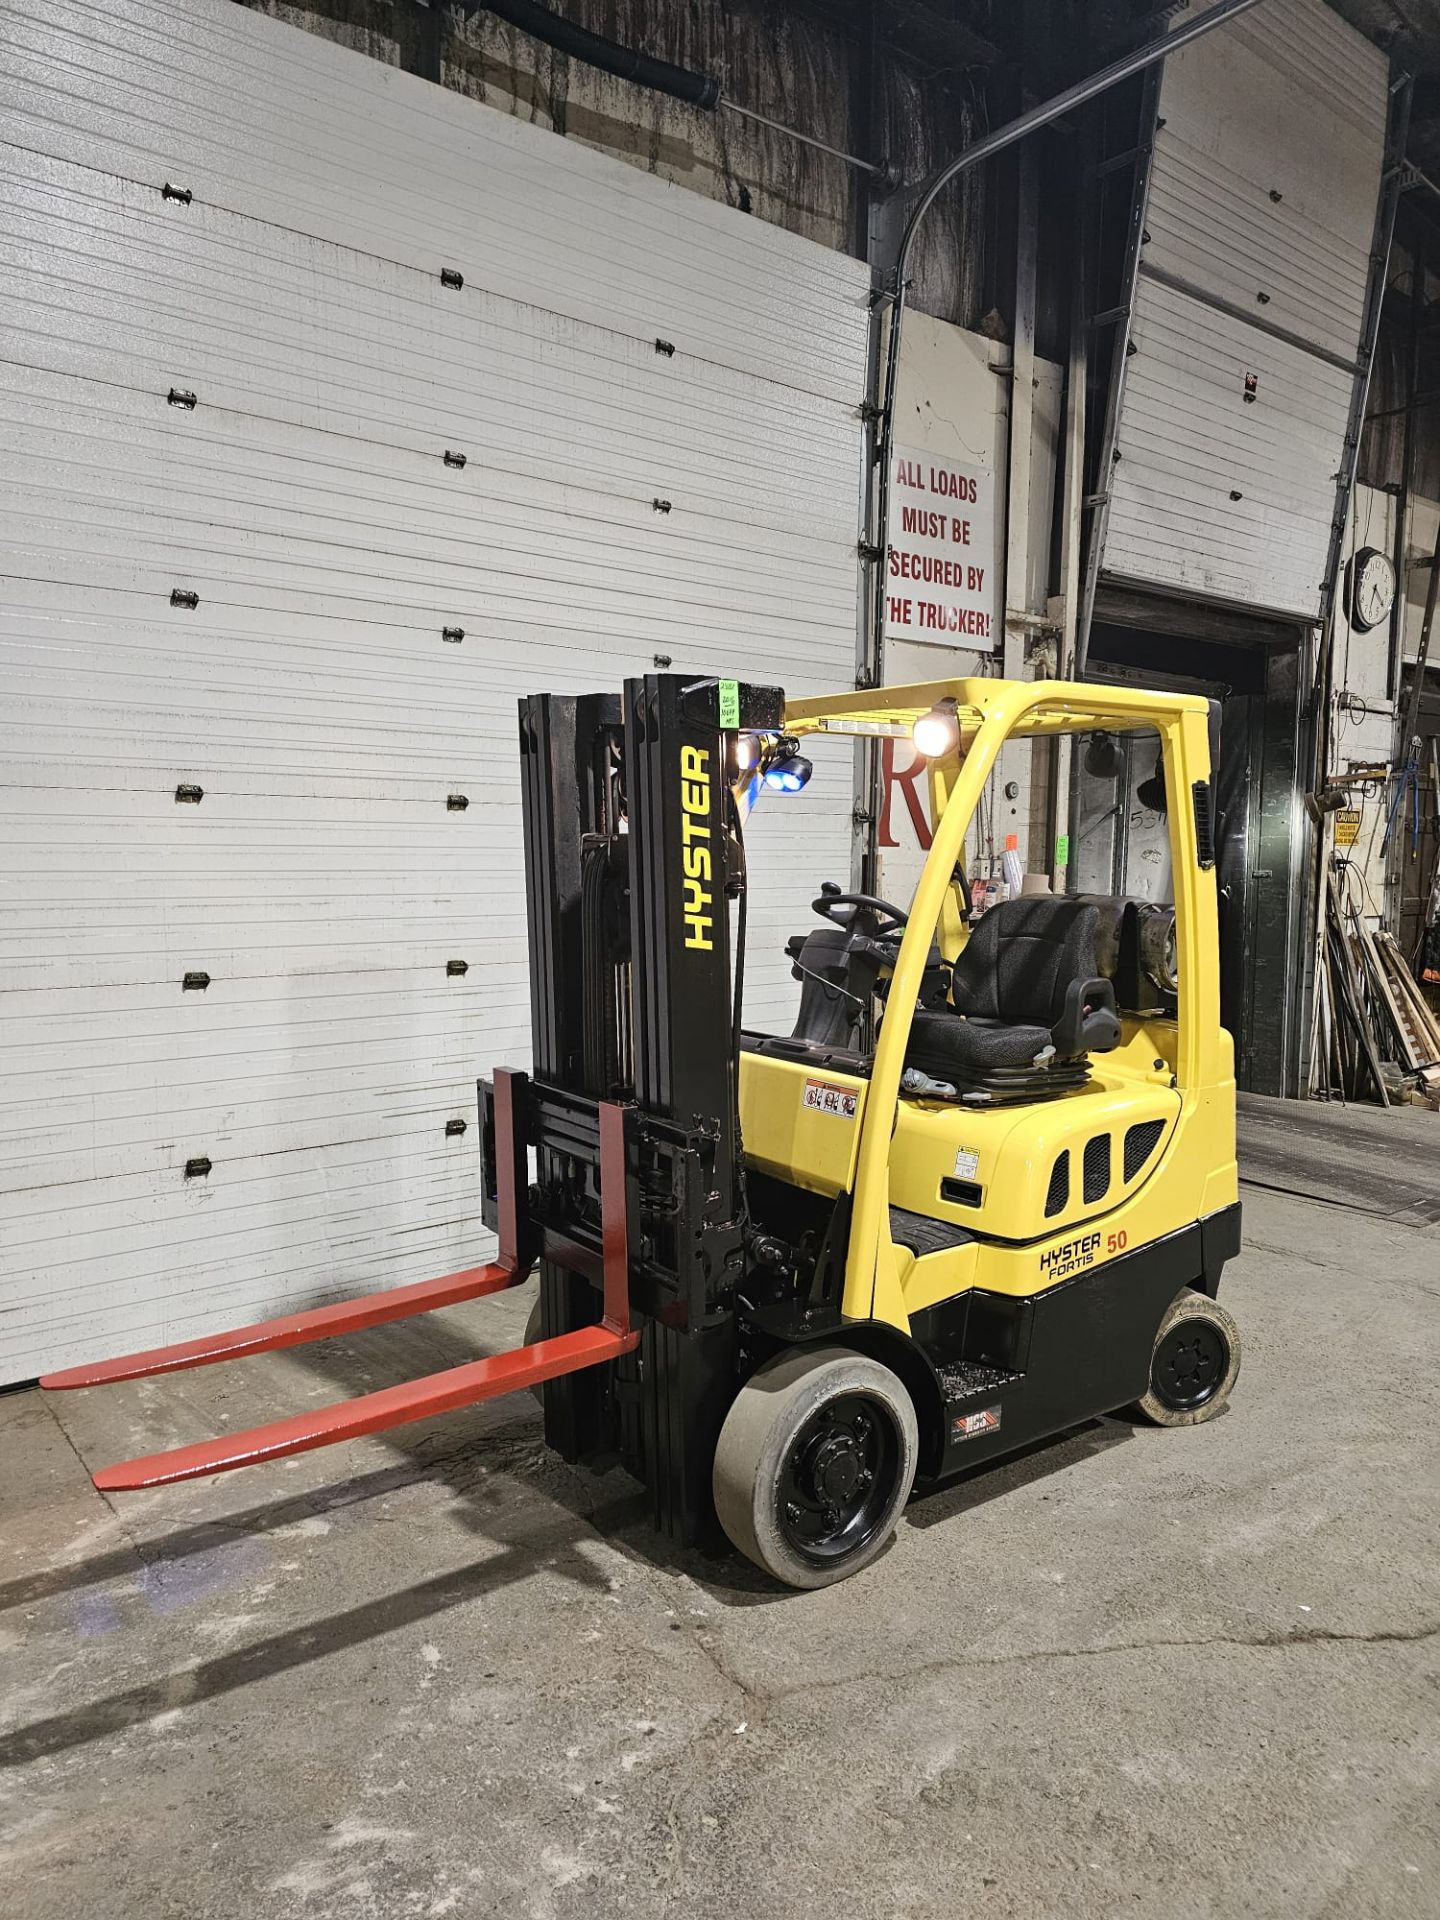 2016 HYSTER 5,000lbs Capacity LPG (Propane) Forklift with sideshift - 4 function control hookup & - Image 2 of 8